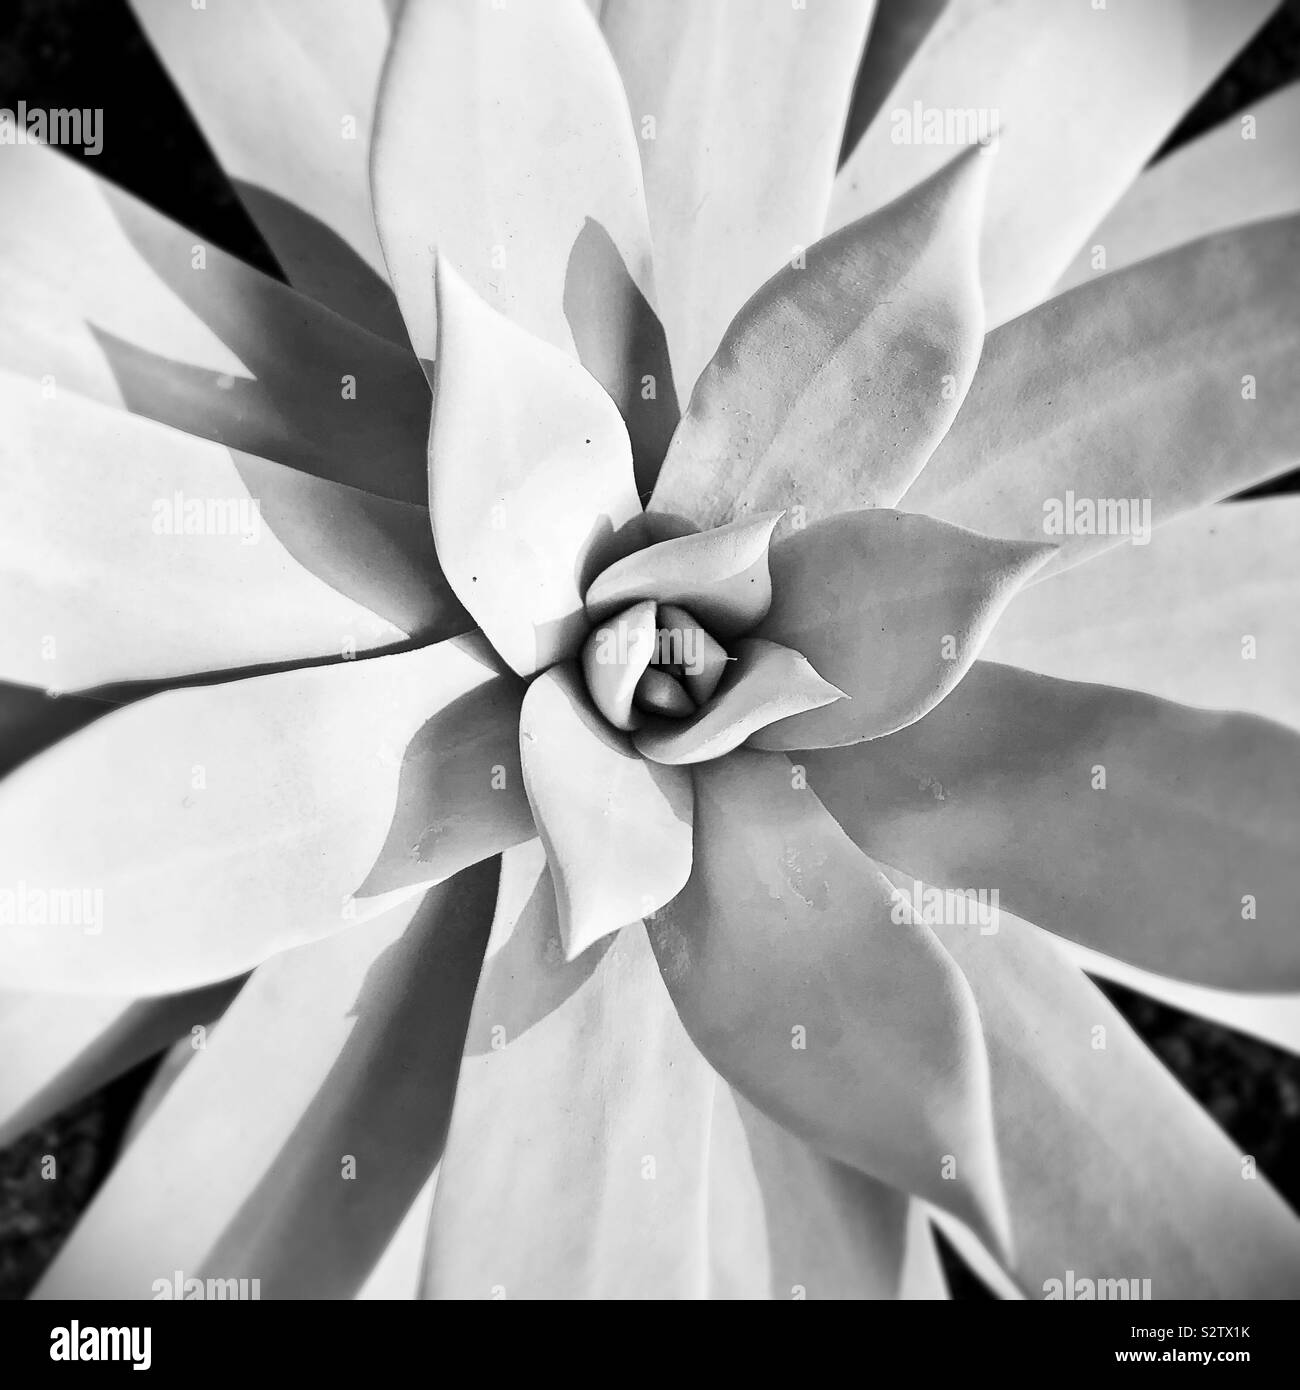 A black and white close-up of a dudleya brittonii plant. Stock Photo